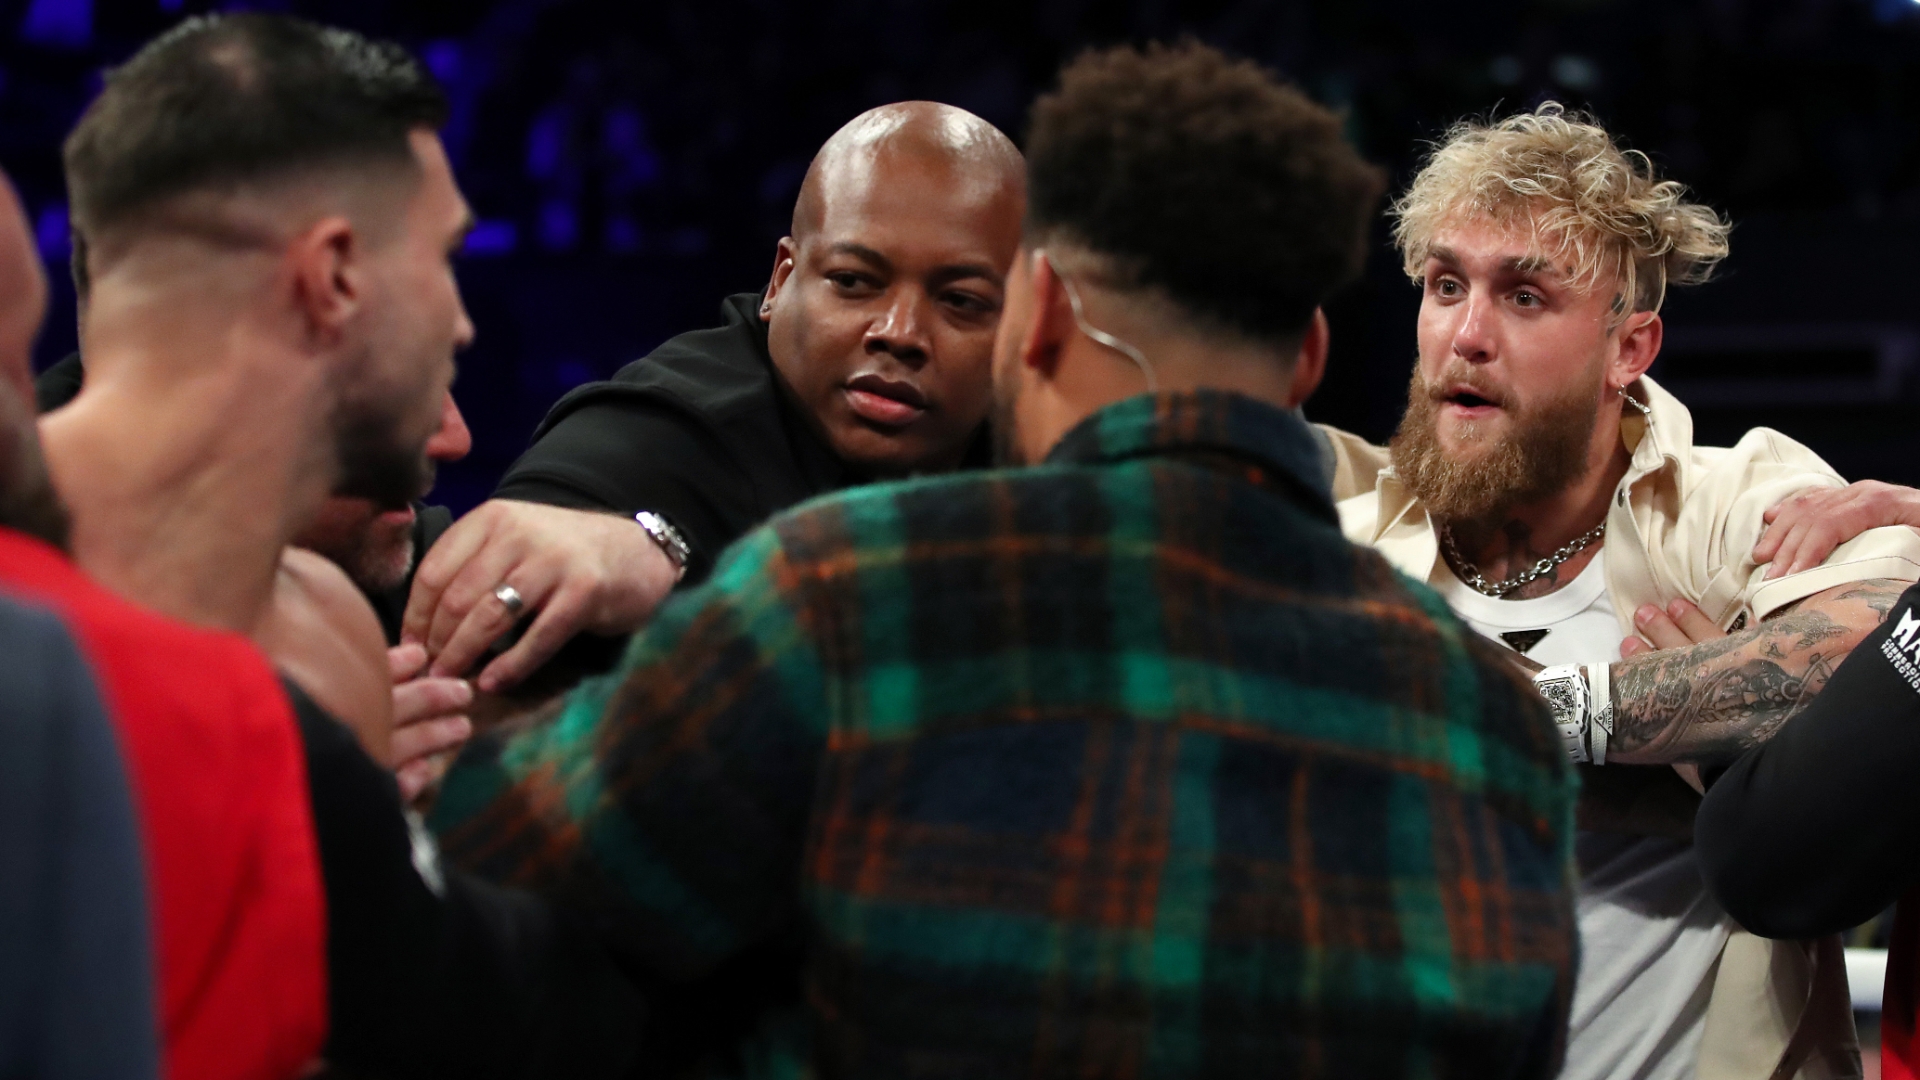 Jake Paul, Tommy Fury shove each other in faceoff